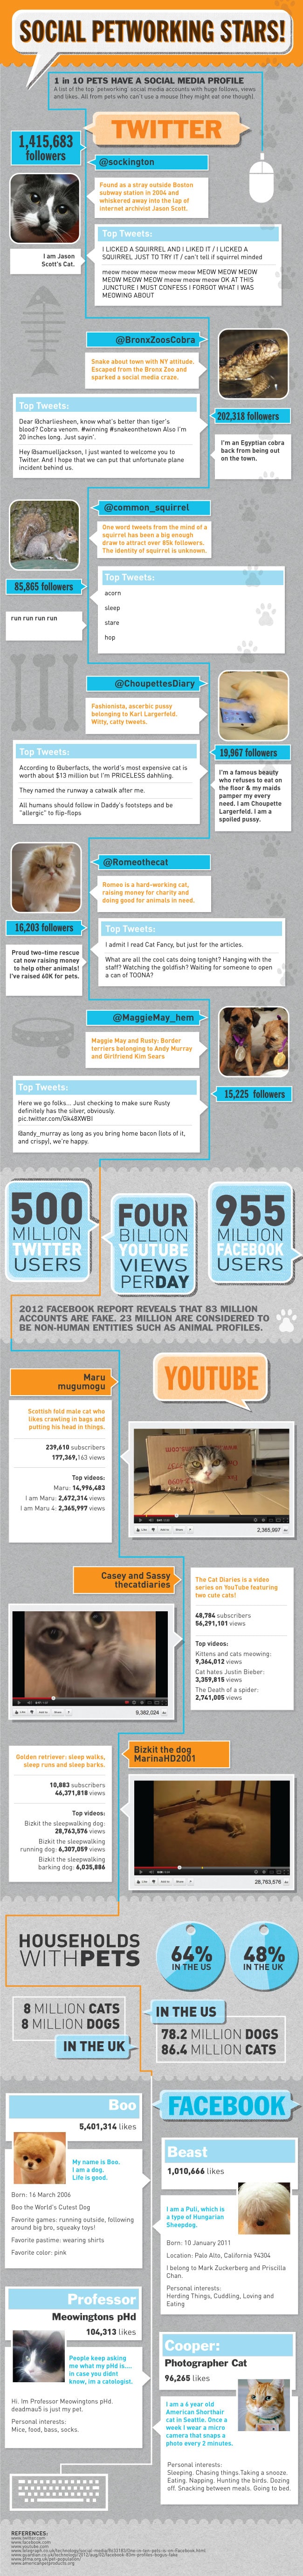 Pets Who Are Famous On Twitter, Facebook & YouTube [Infographic]